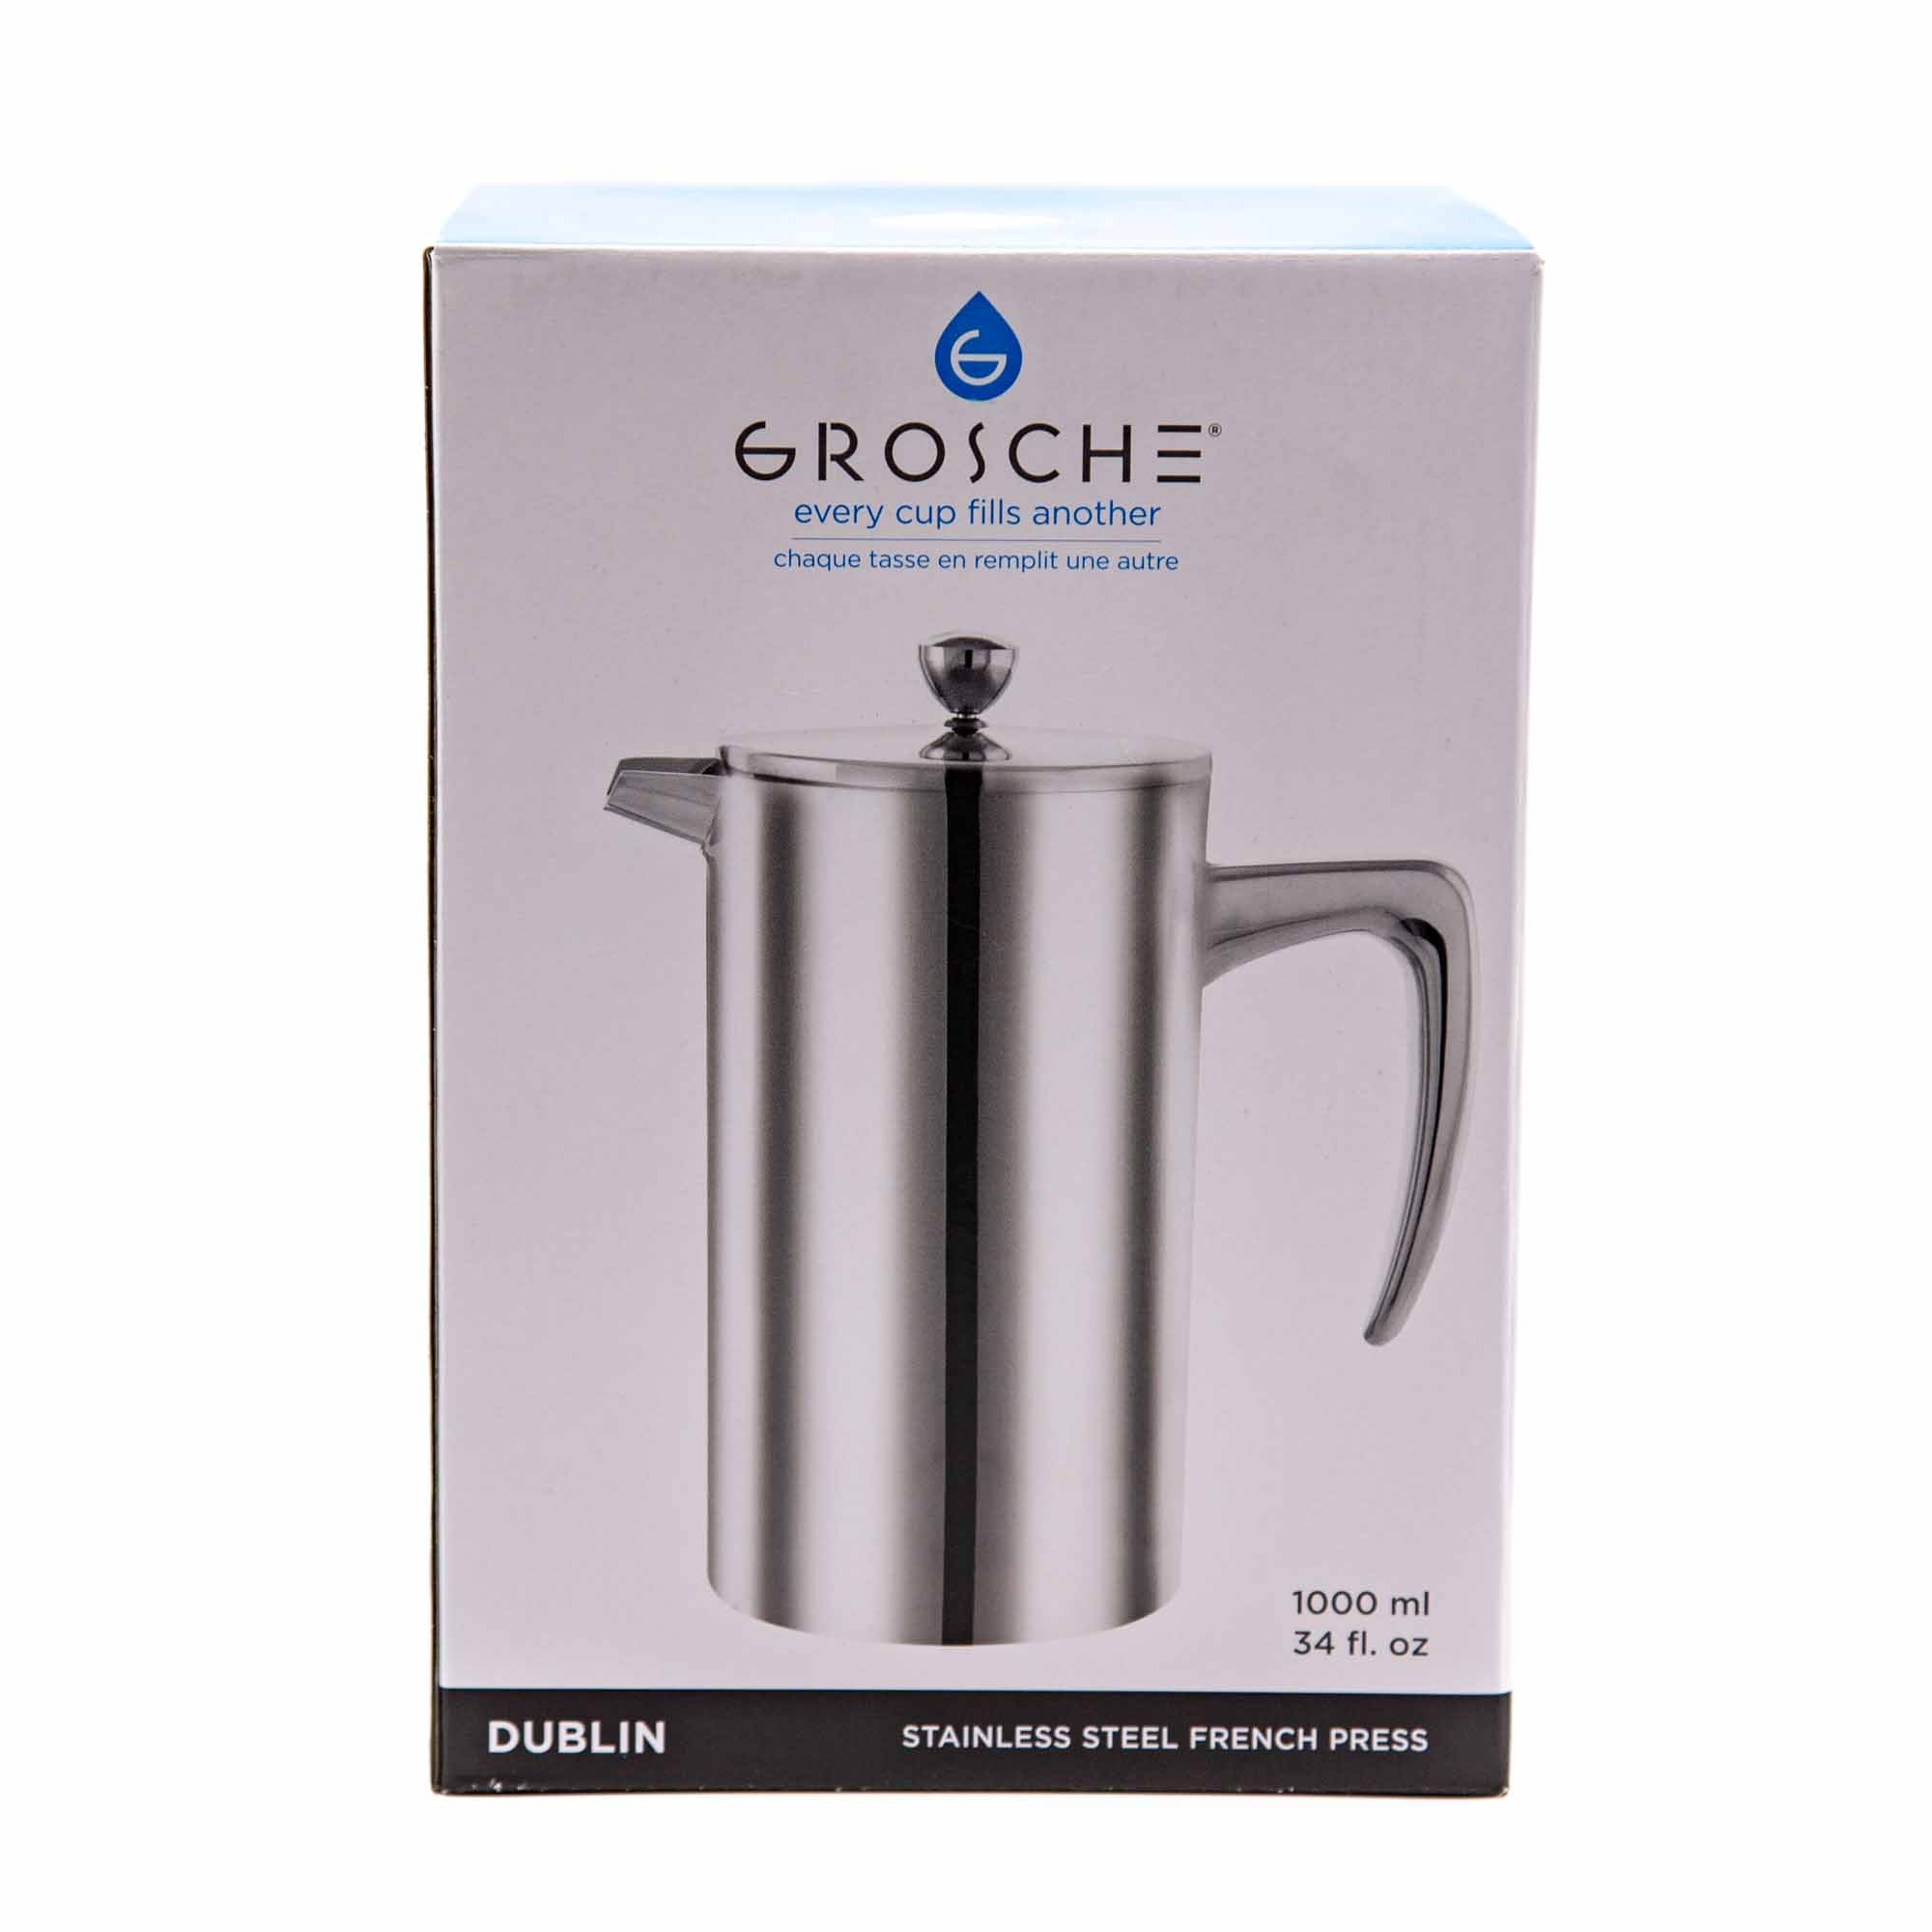 Grosche DUBLIN Stainless Steel French Press - Mortise And Tenon